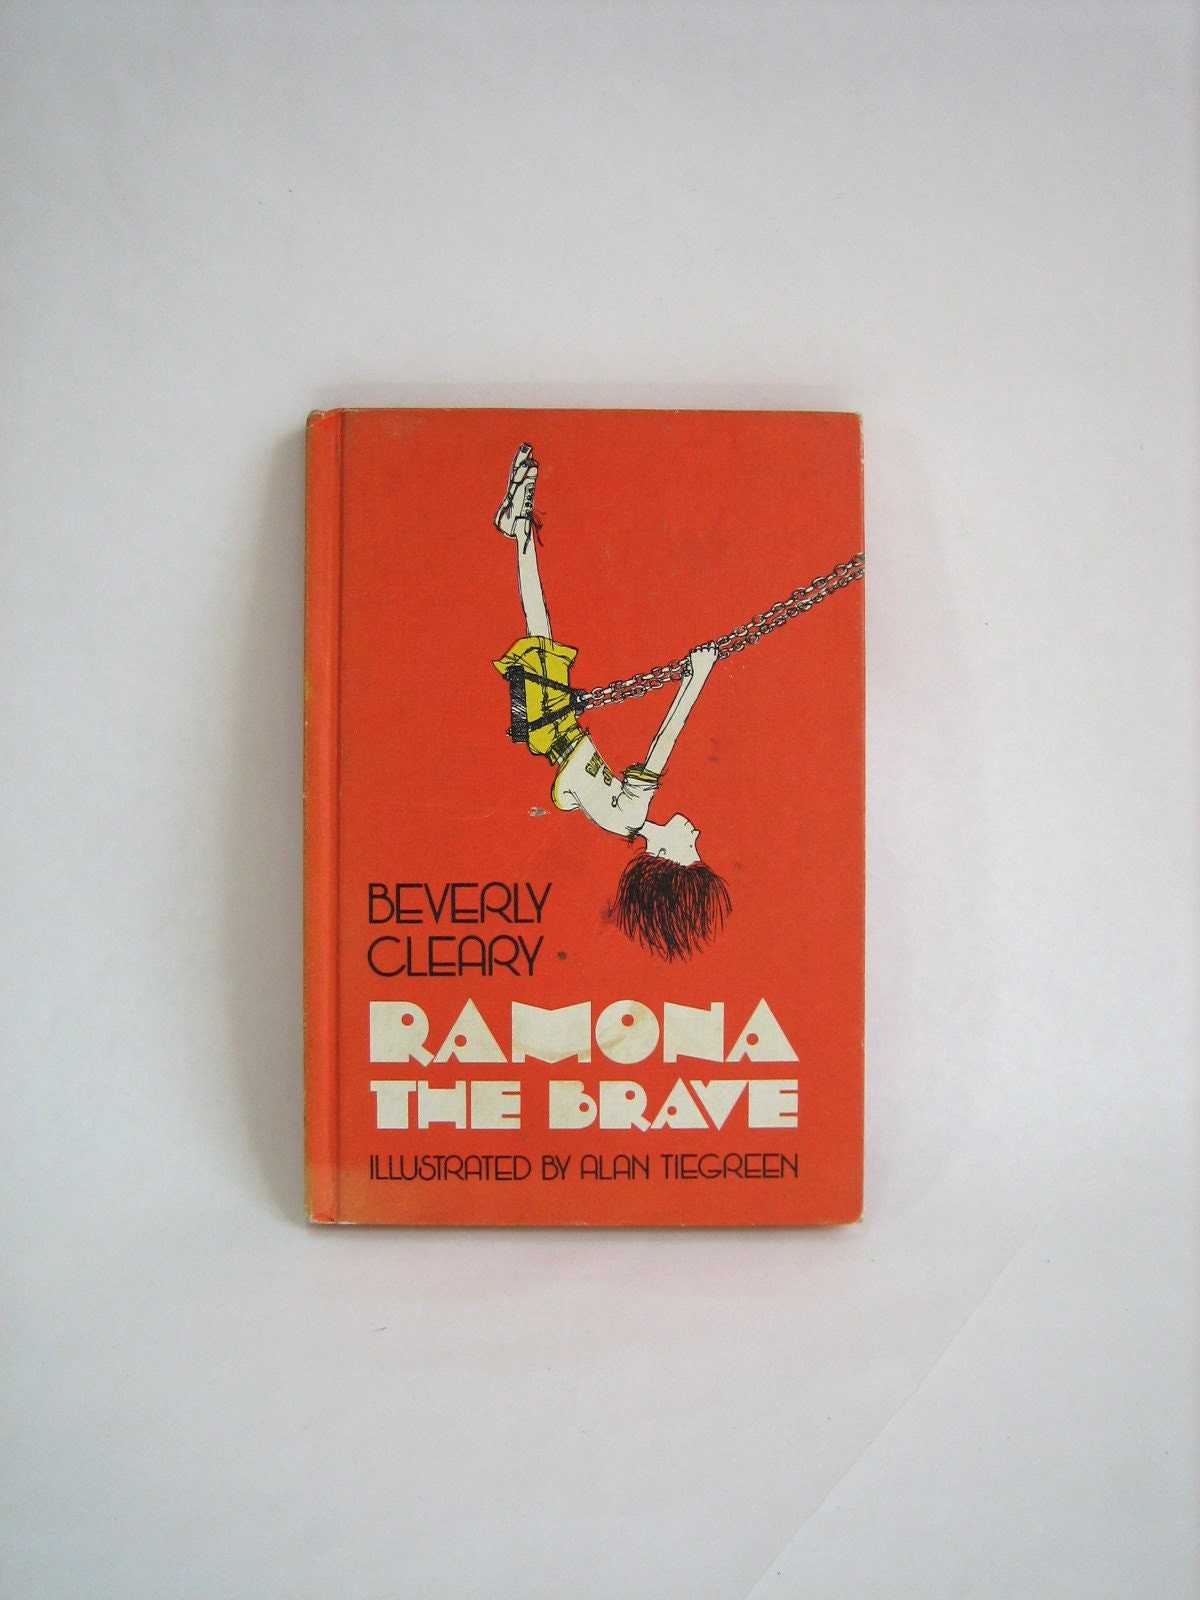 ramona the brave by beverly cleary